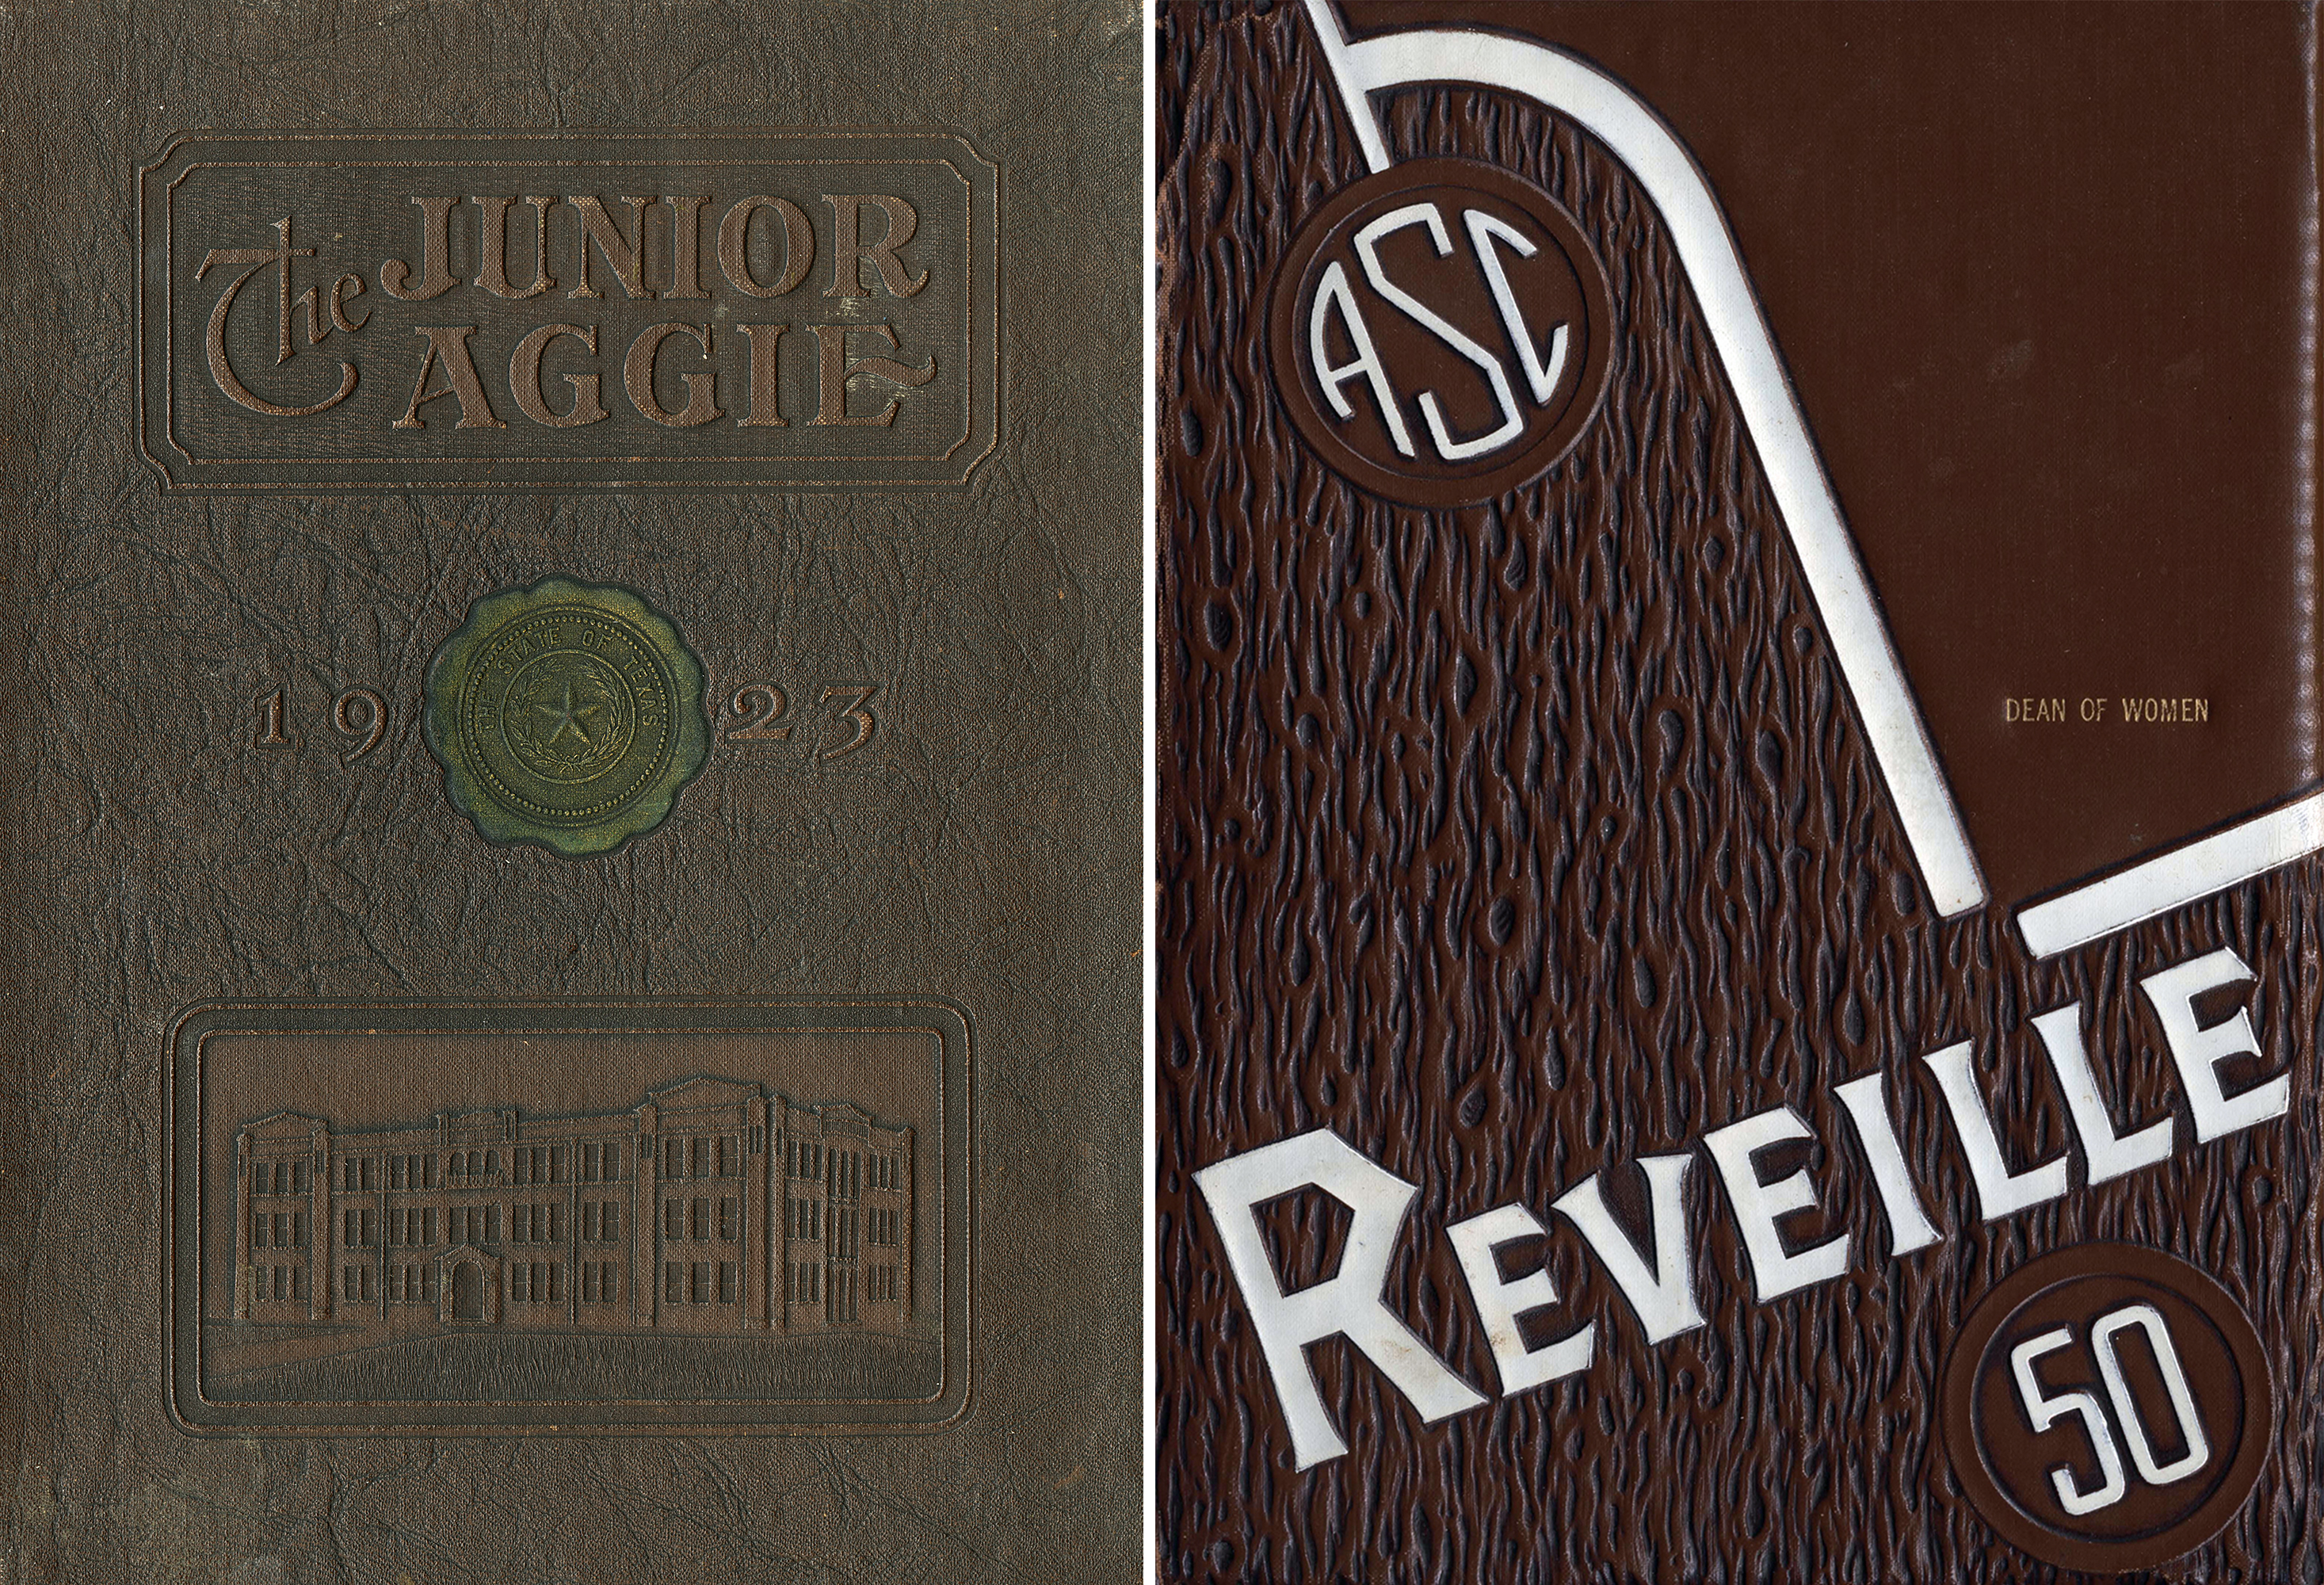 Covers of two UTA yearbooks from 1923, left, and 1950, right.